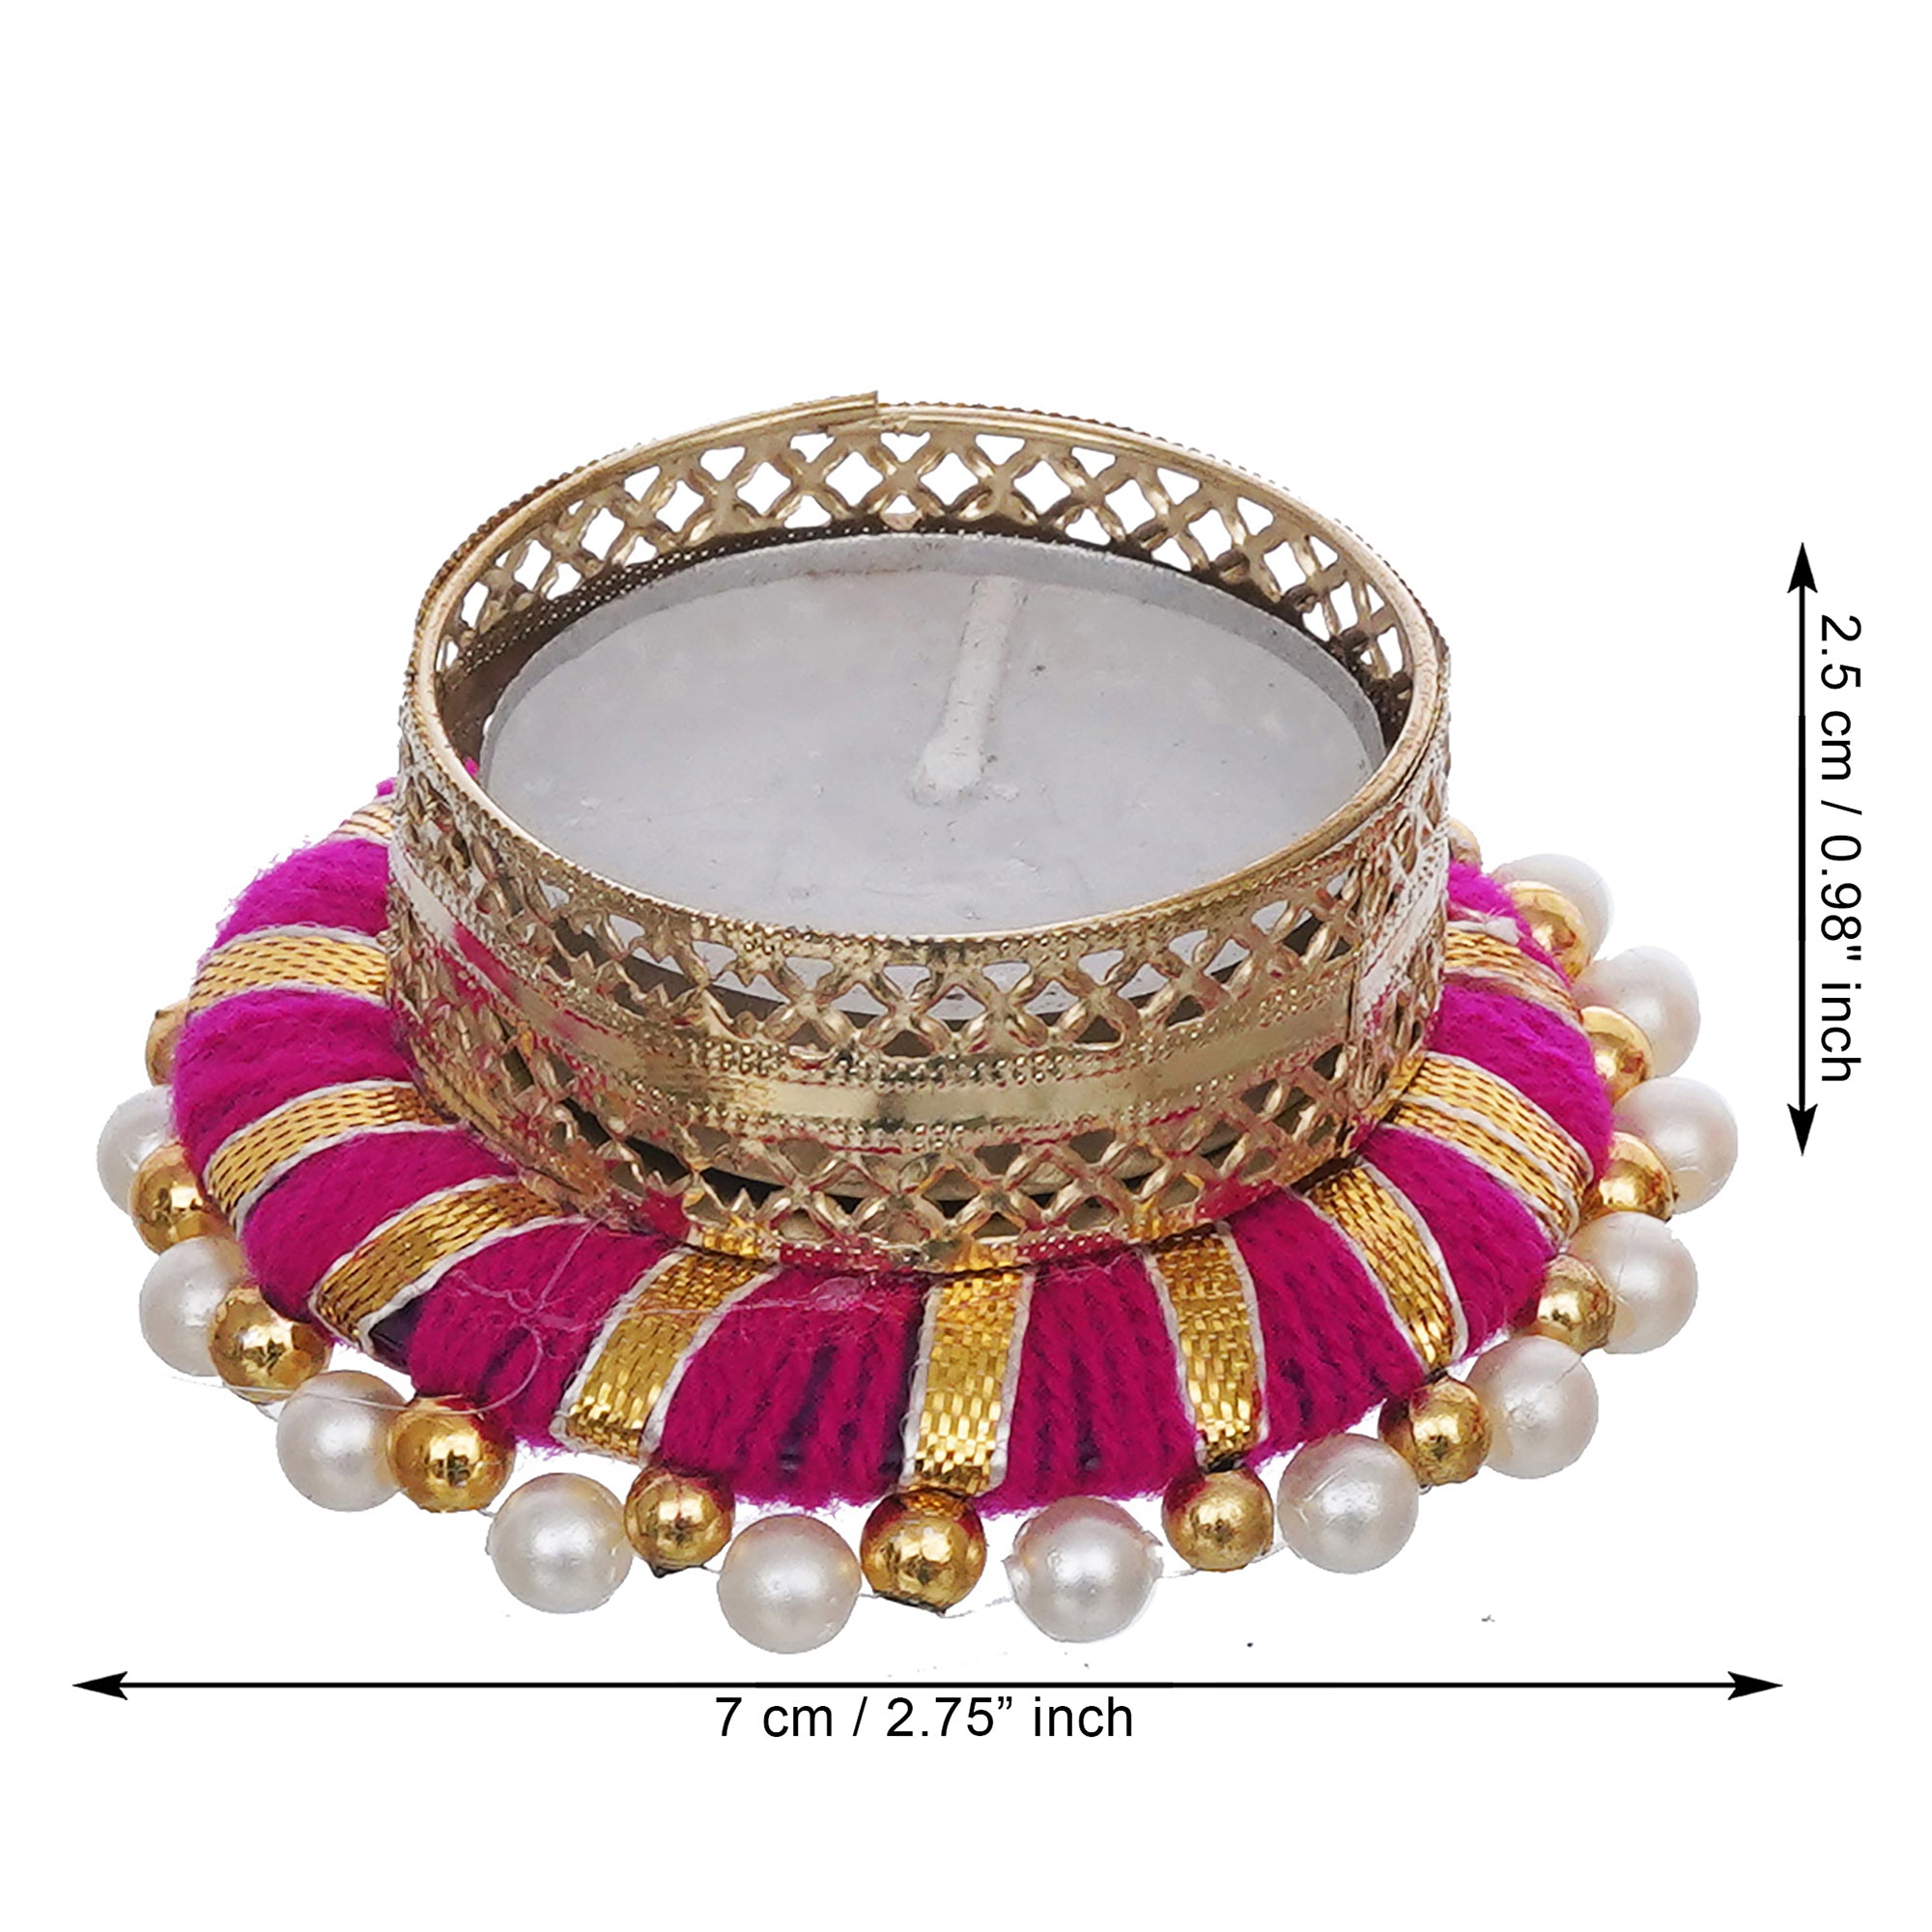 eCraftIndia Golden and Pink Decorative Tea Light Candle Holders (Set of 2) 3